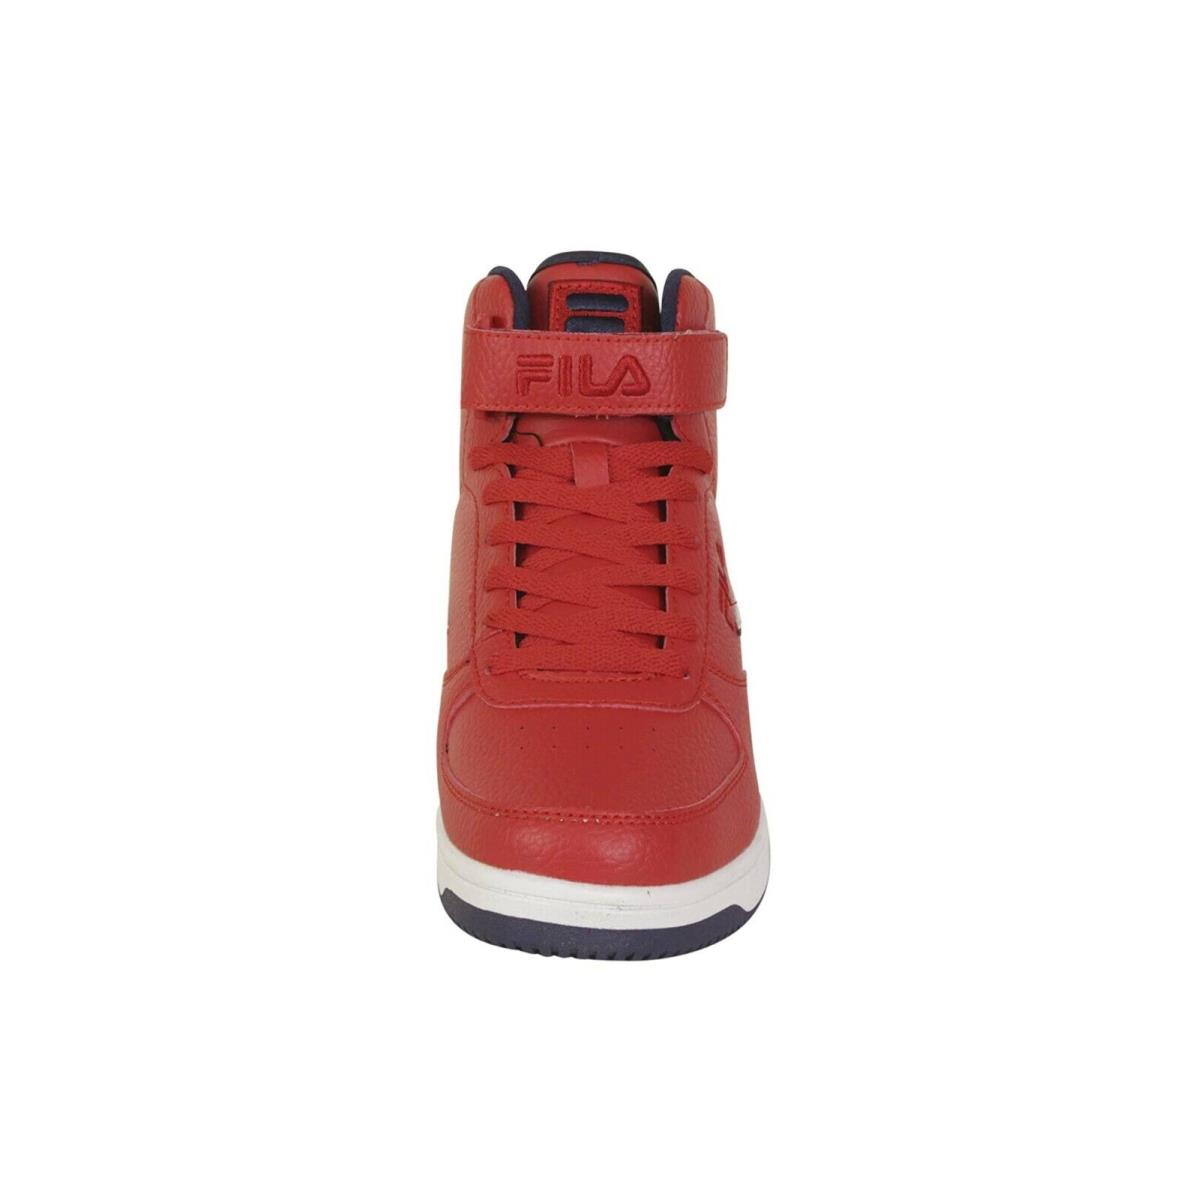 Fila shoes  - Red 1